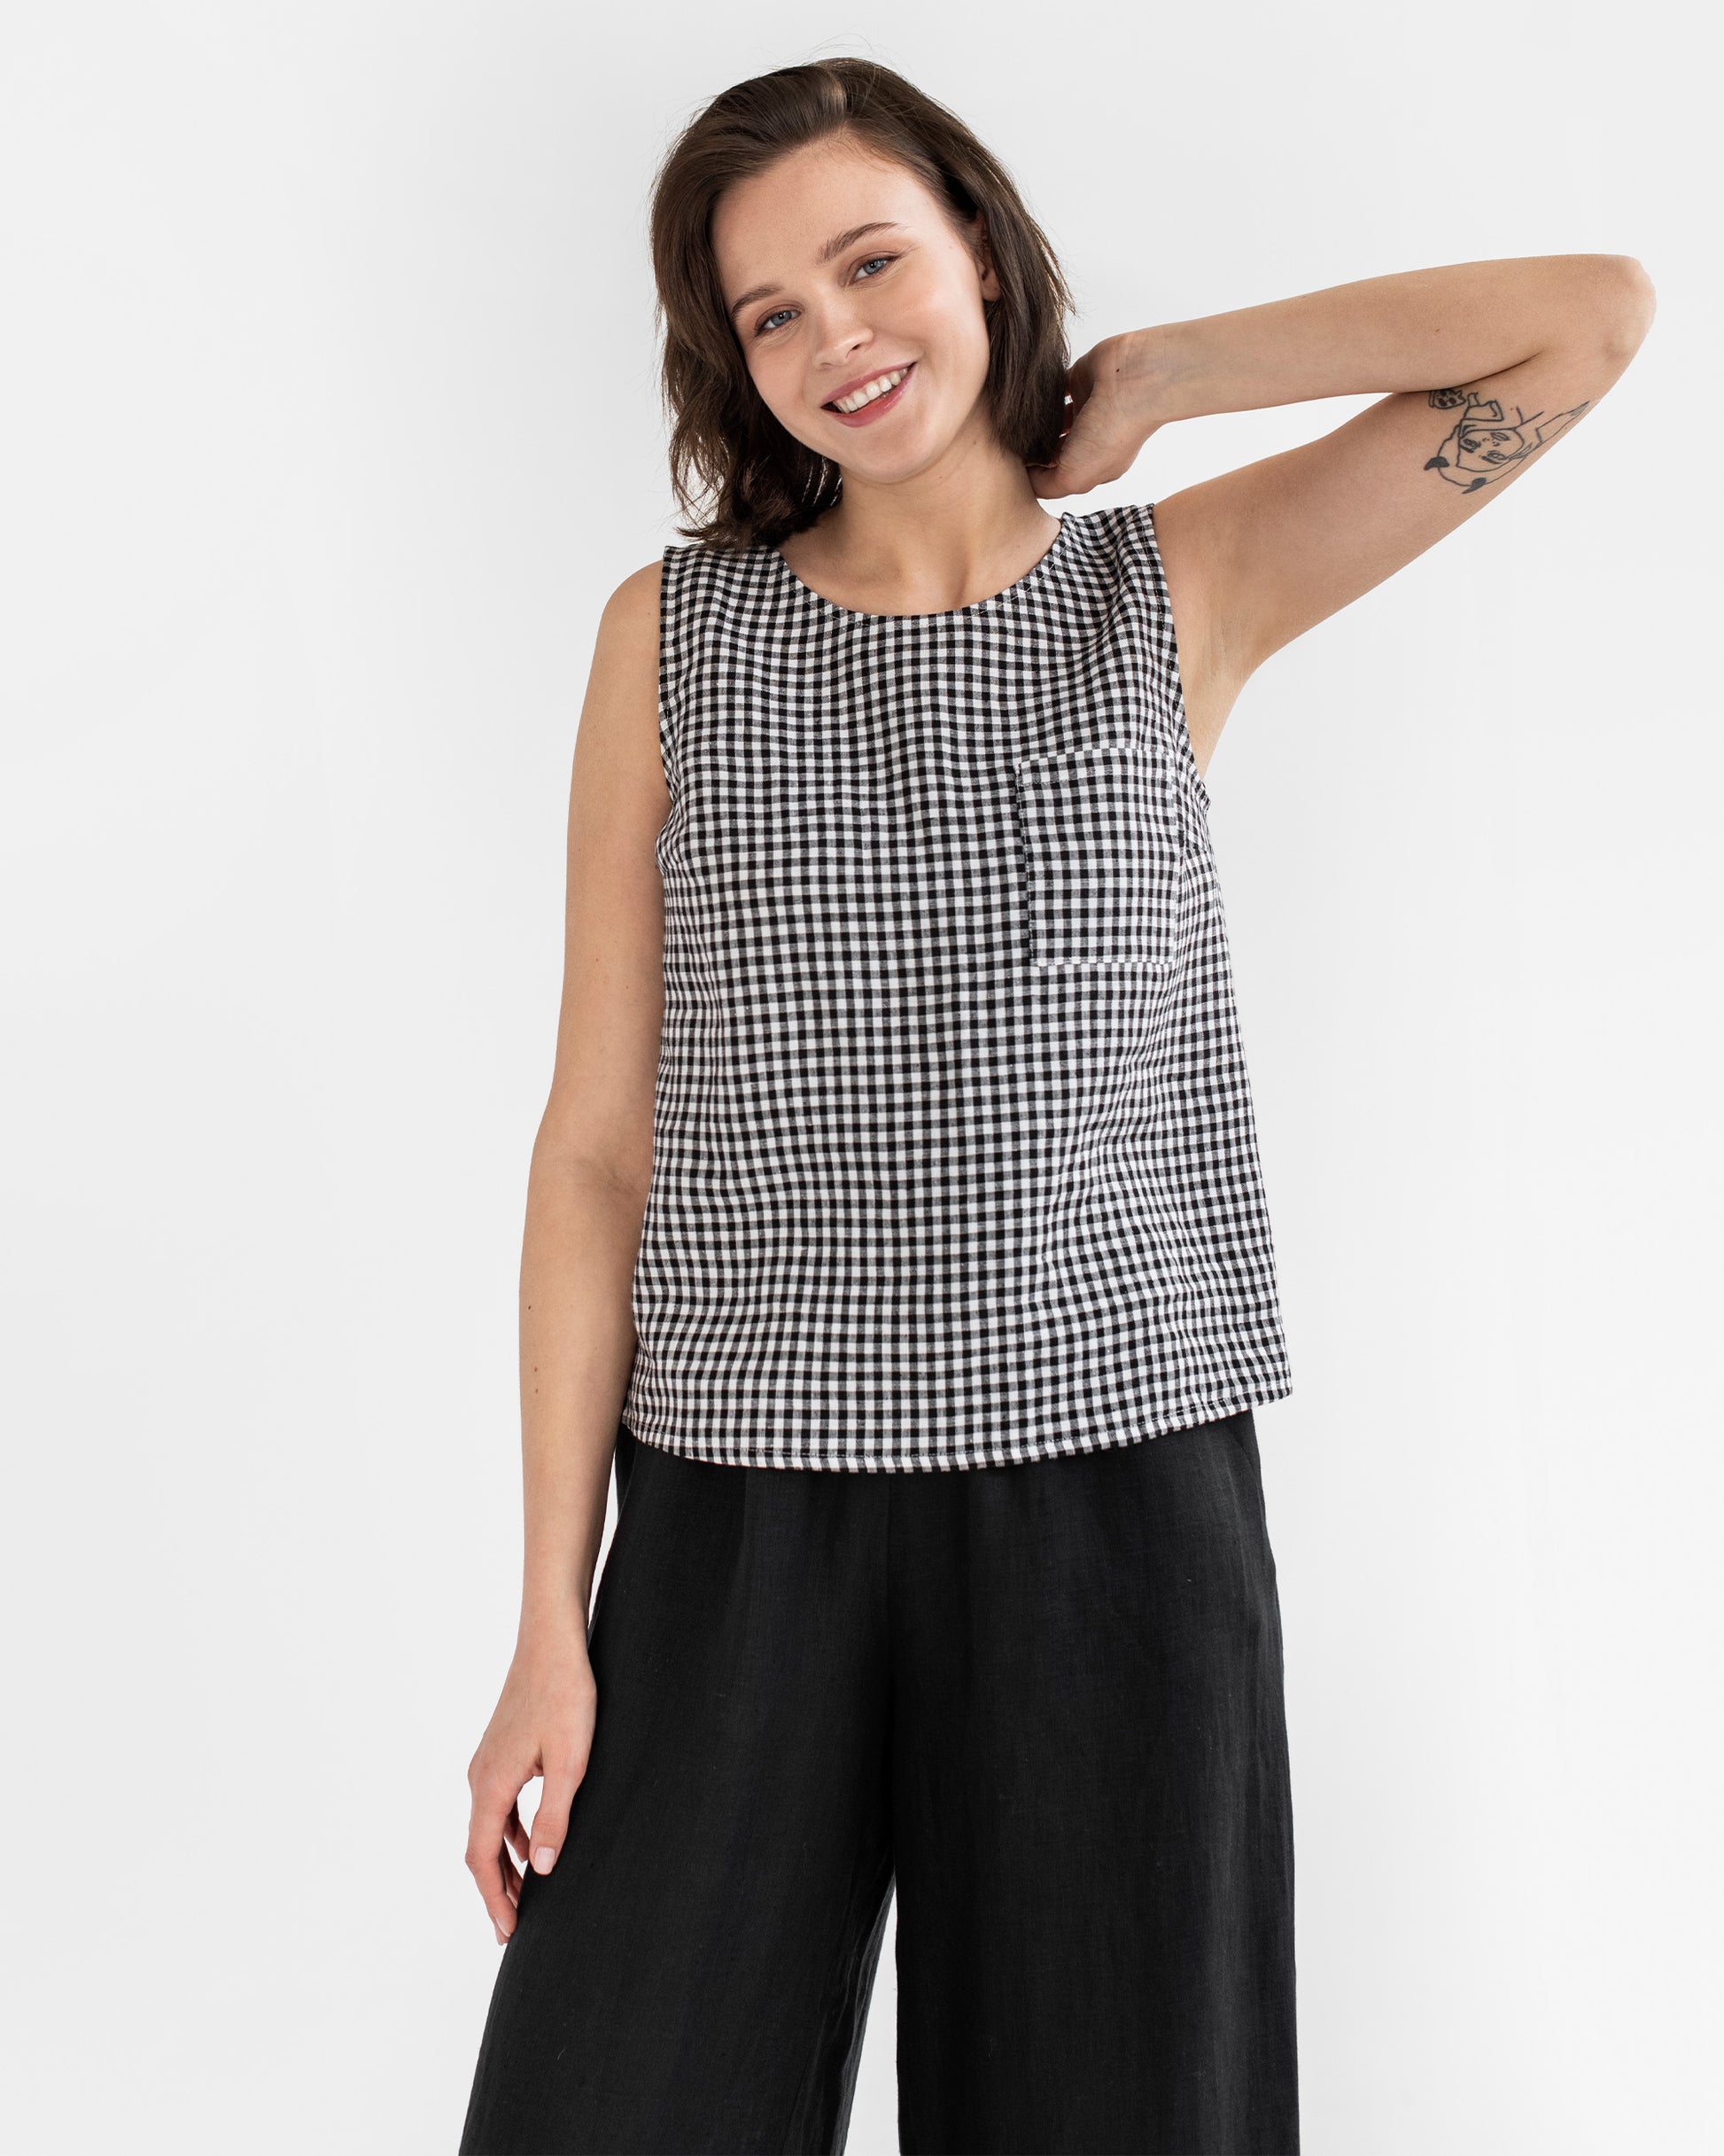 Sleeveless linen top SILAY in Black gingham - MagicLinen